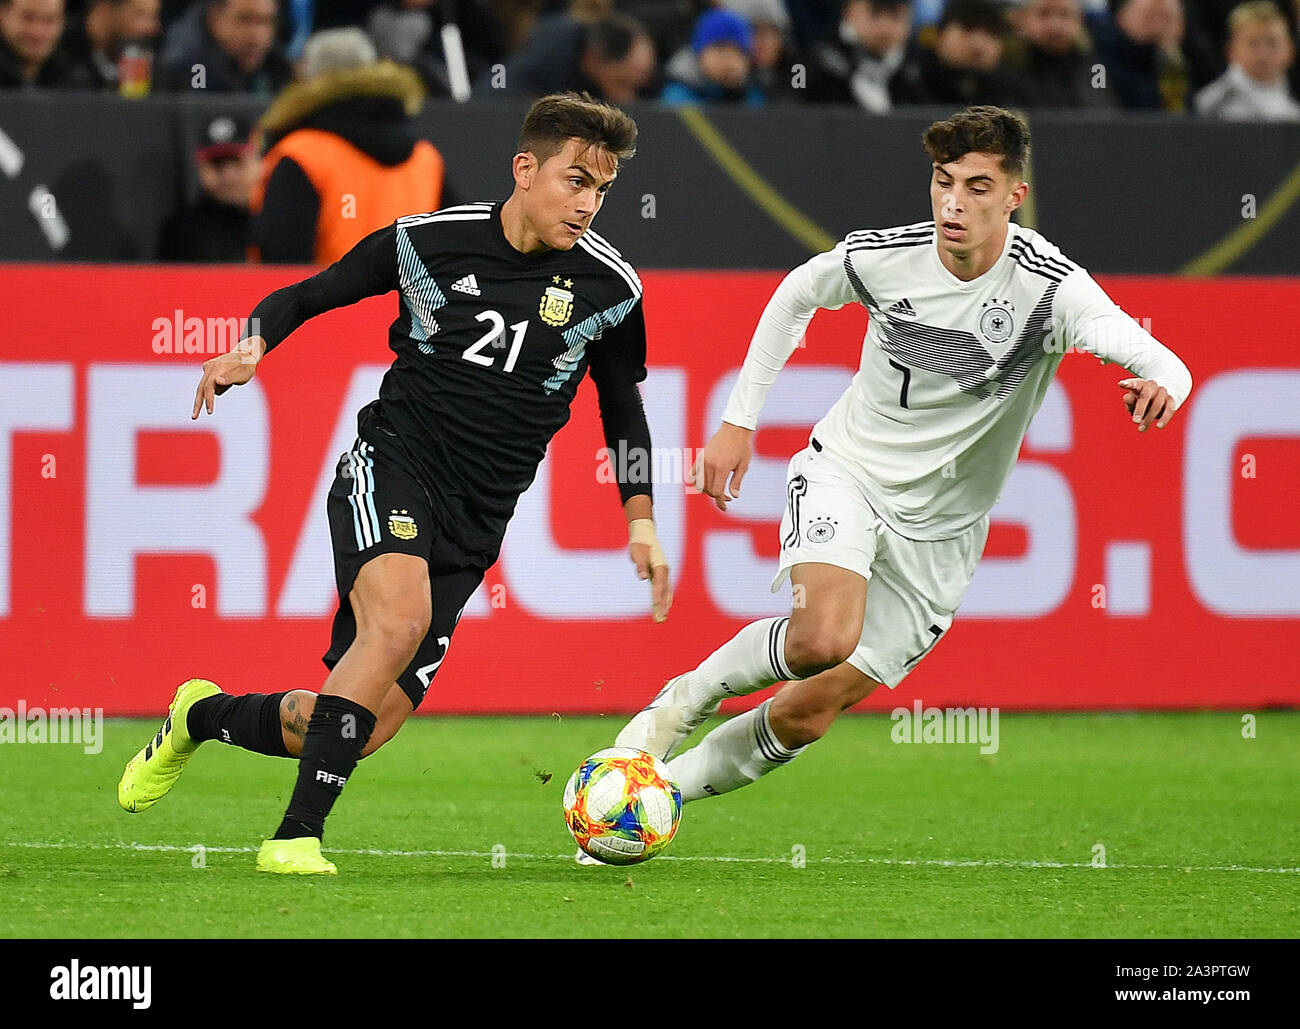 Dortmund, Germany. 9th Oct, 2019. Paulo Dybala (L) of Argentina vies with Kai Havertz of Germany during an international friendly soccer match between Germany and Argentina in Dortmund, Germany, Oct. 9, 2019. Credit: Ulrich Hufnagel/Xinhua/Alamy Live News Stock Photo